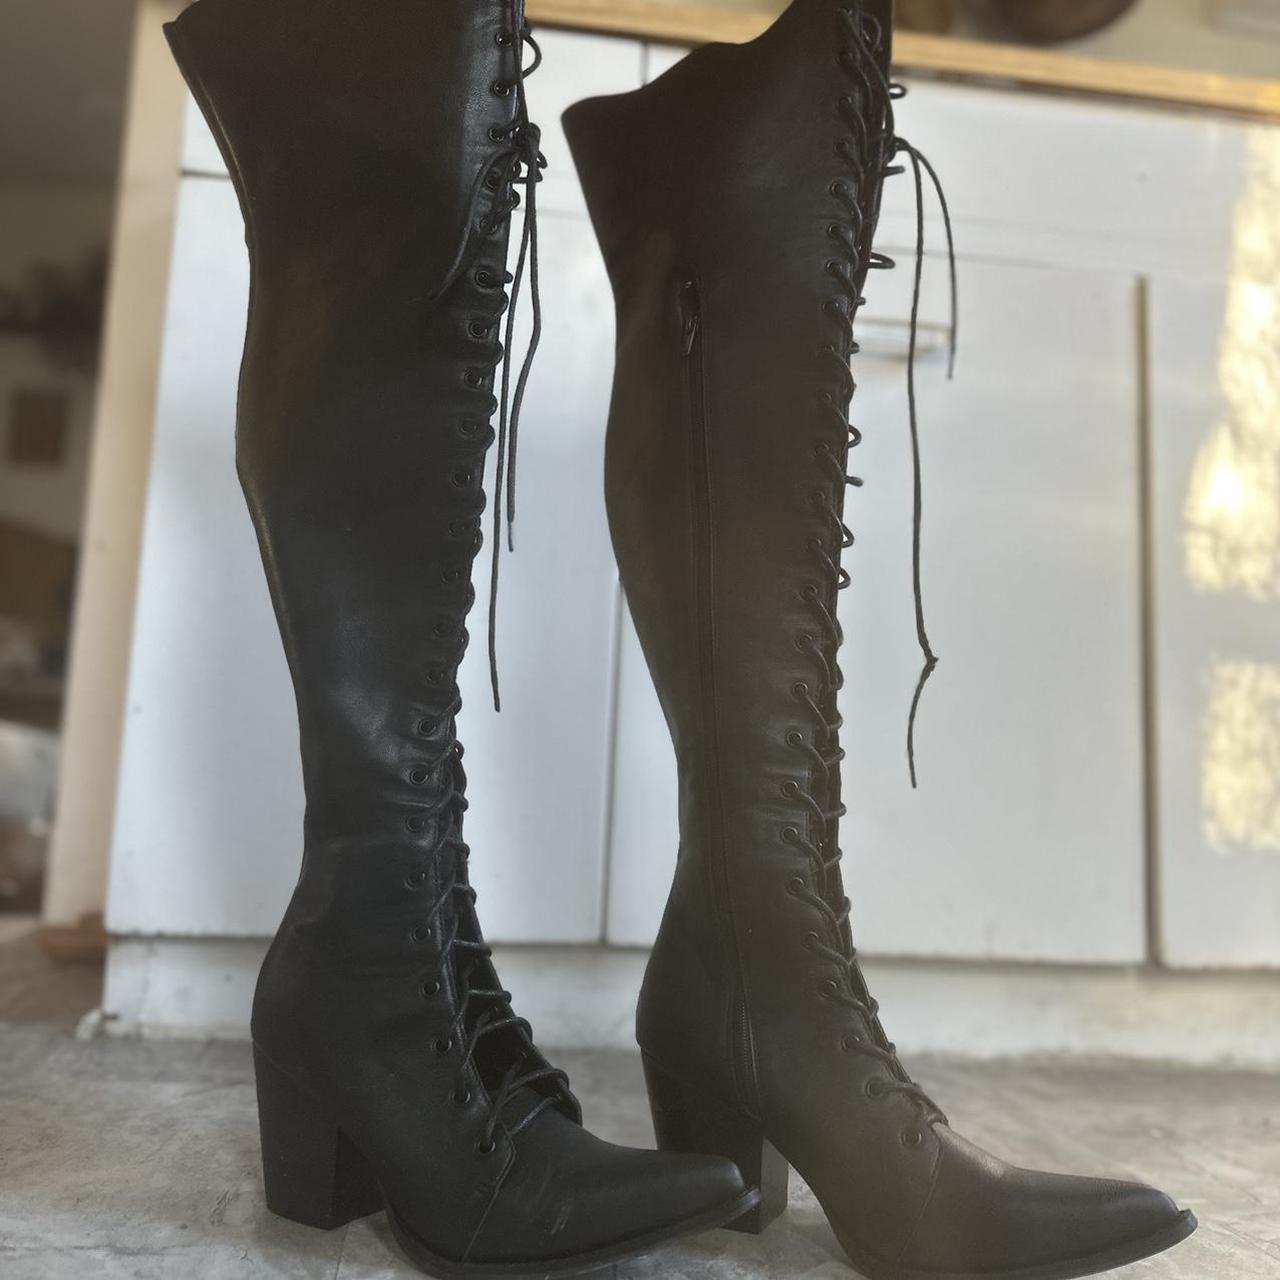 LACE UP THIGH HIGH BOOTS black leather lace up... - Depop